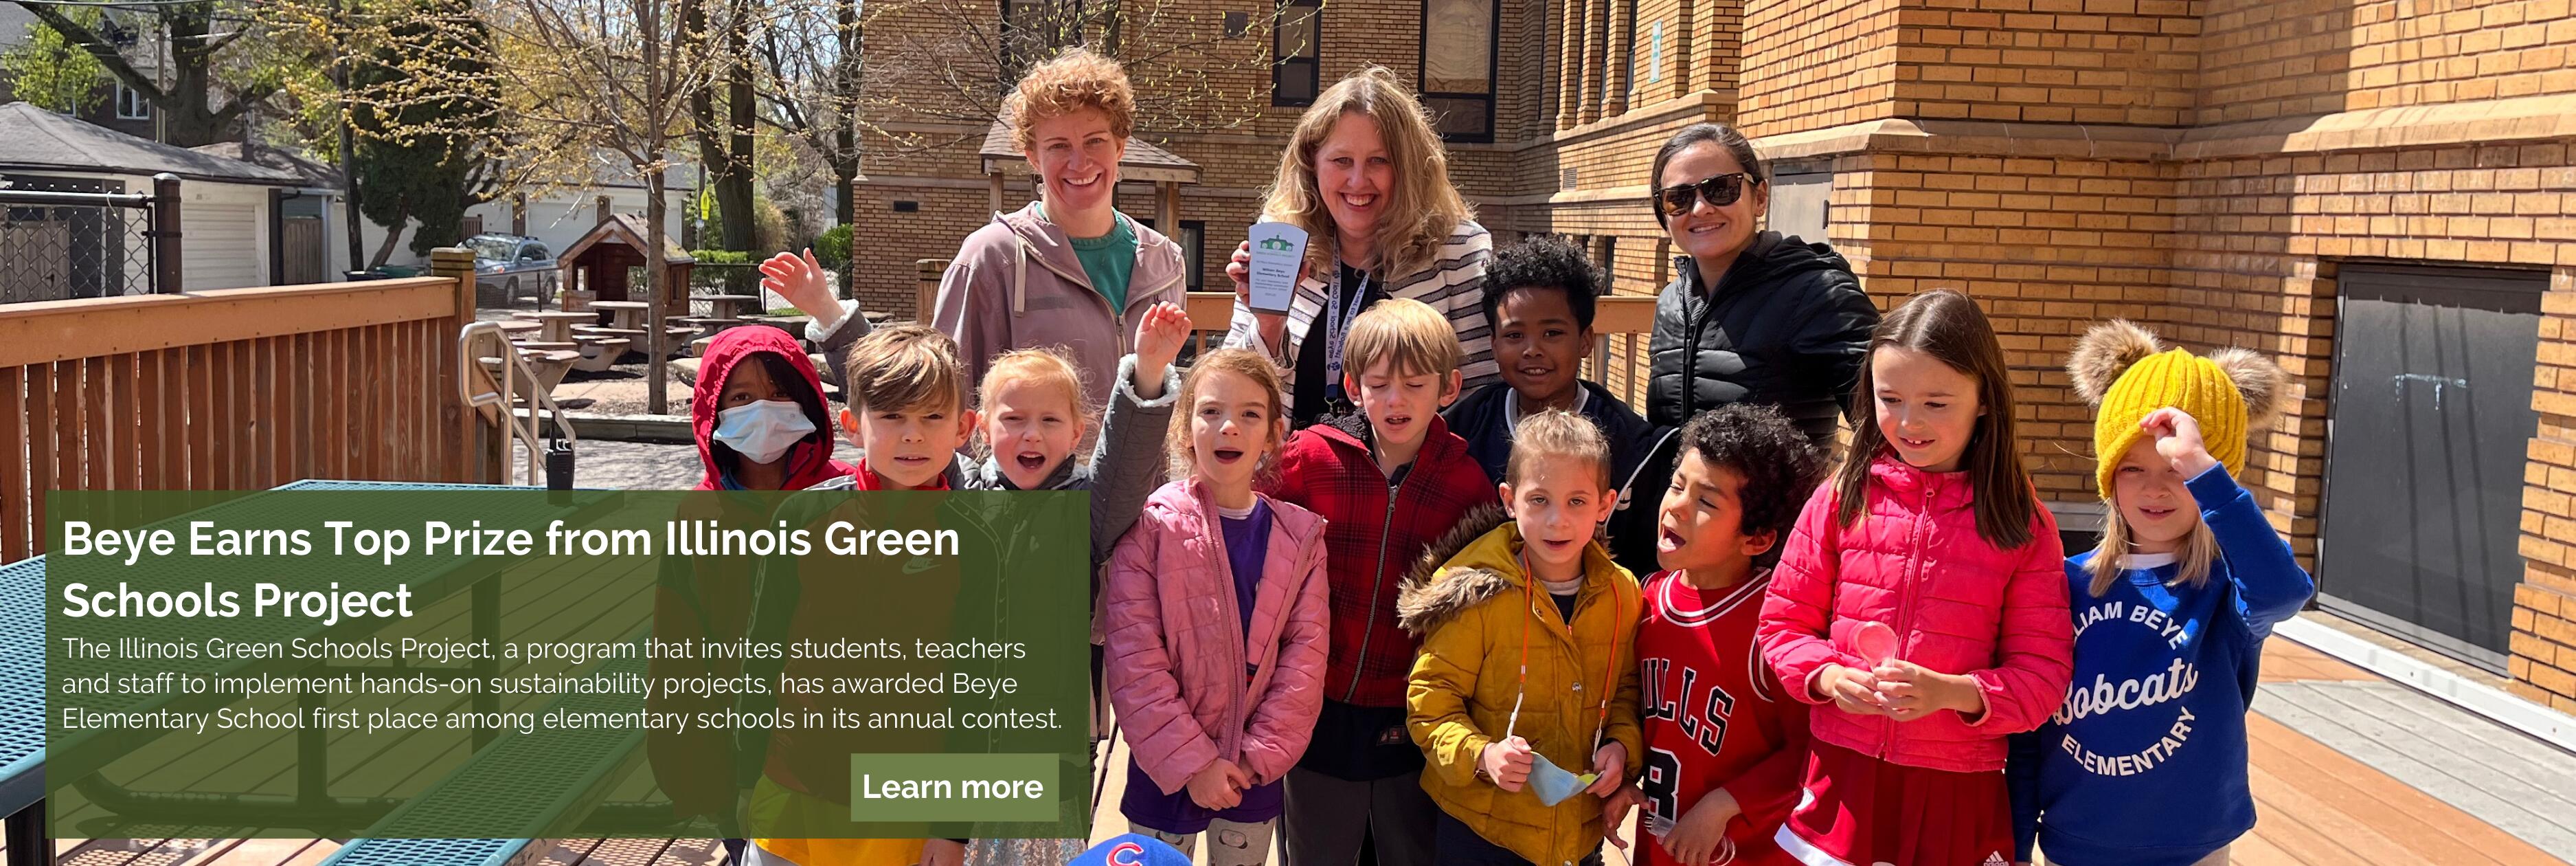 Beye Earns Top Prize from Illinois Green Schools Project